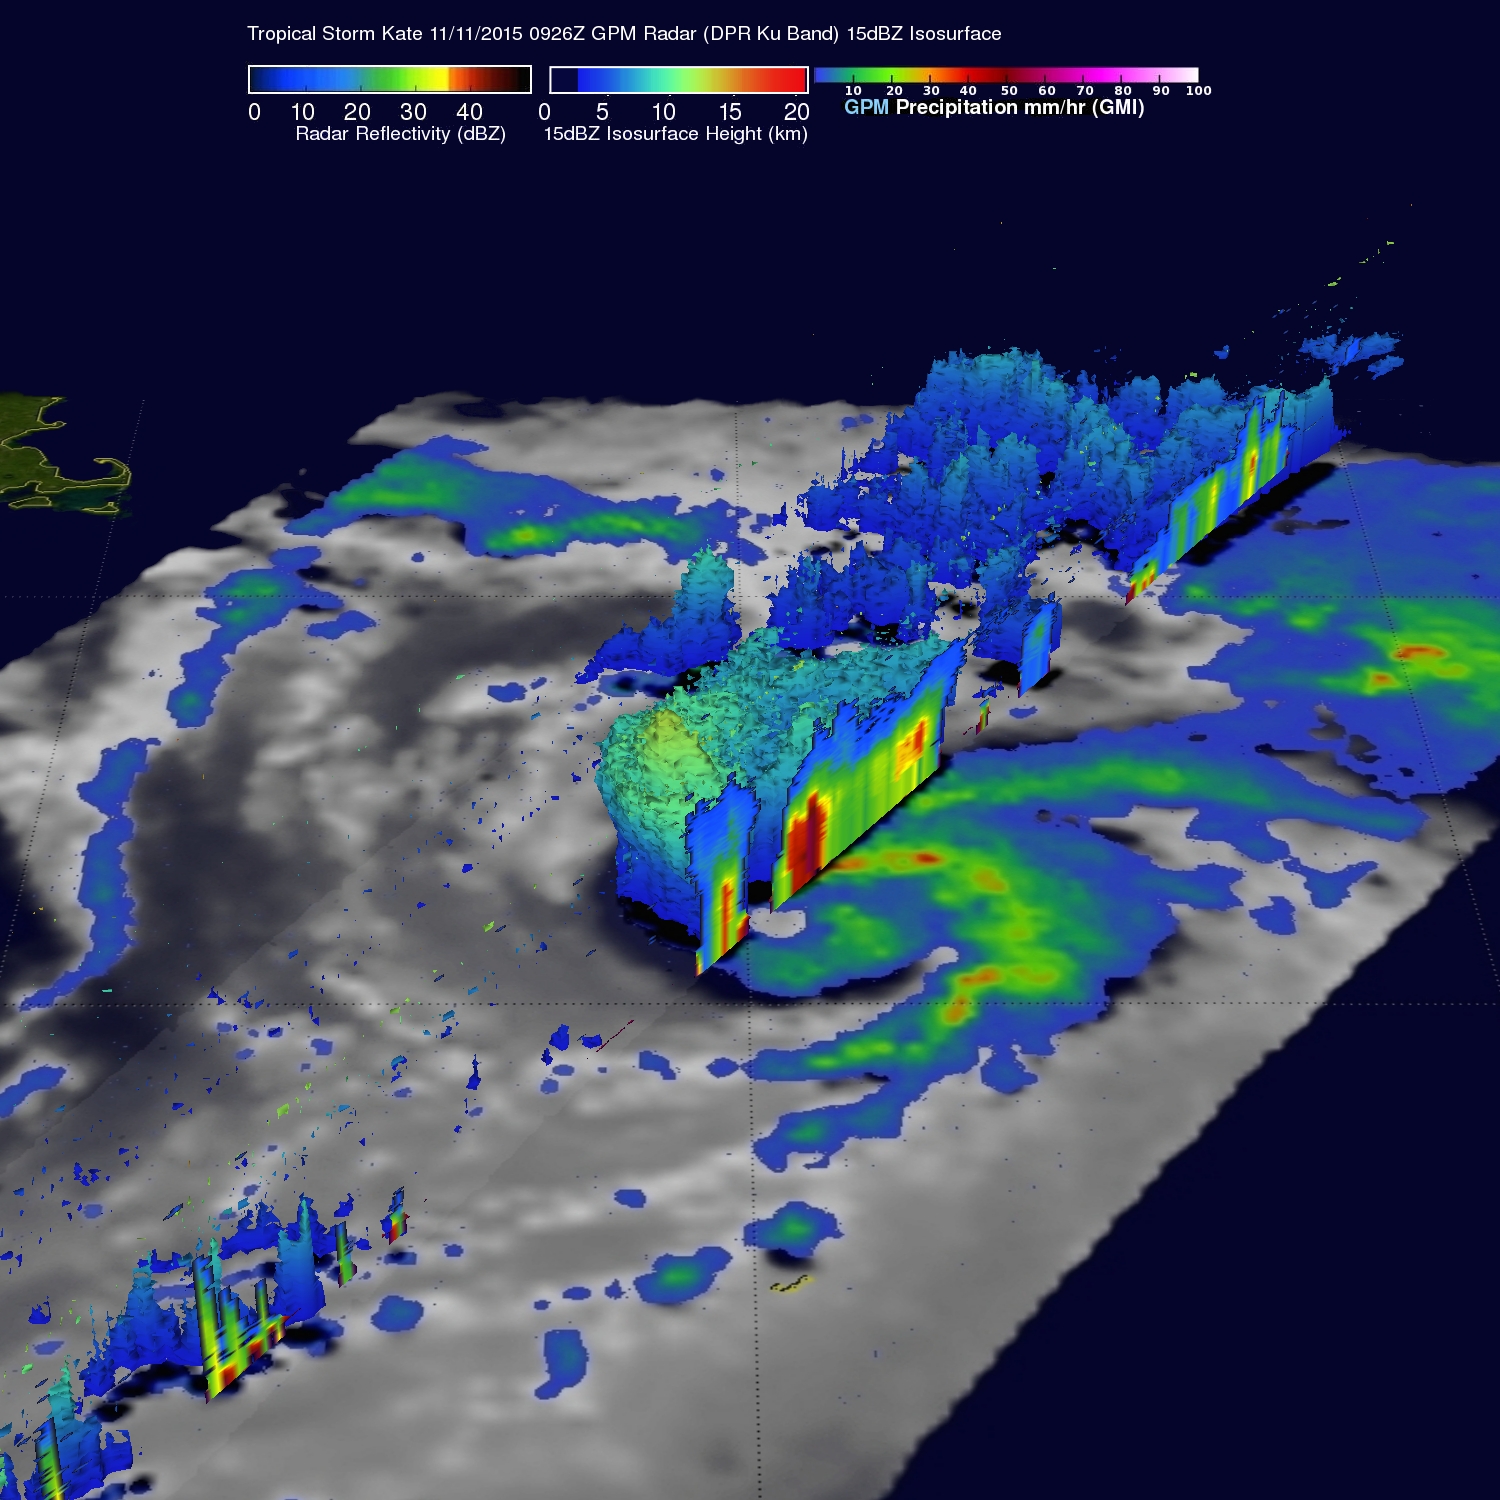 Tropical Storm Kate Examined By GPM